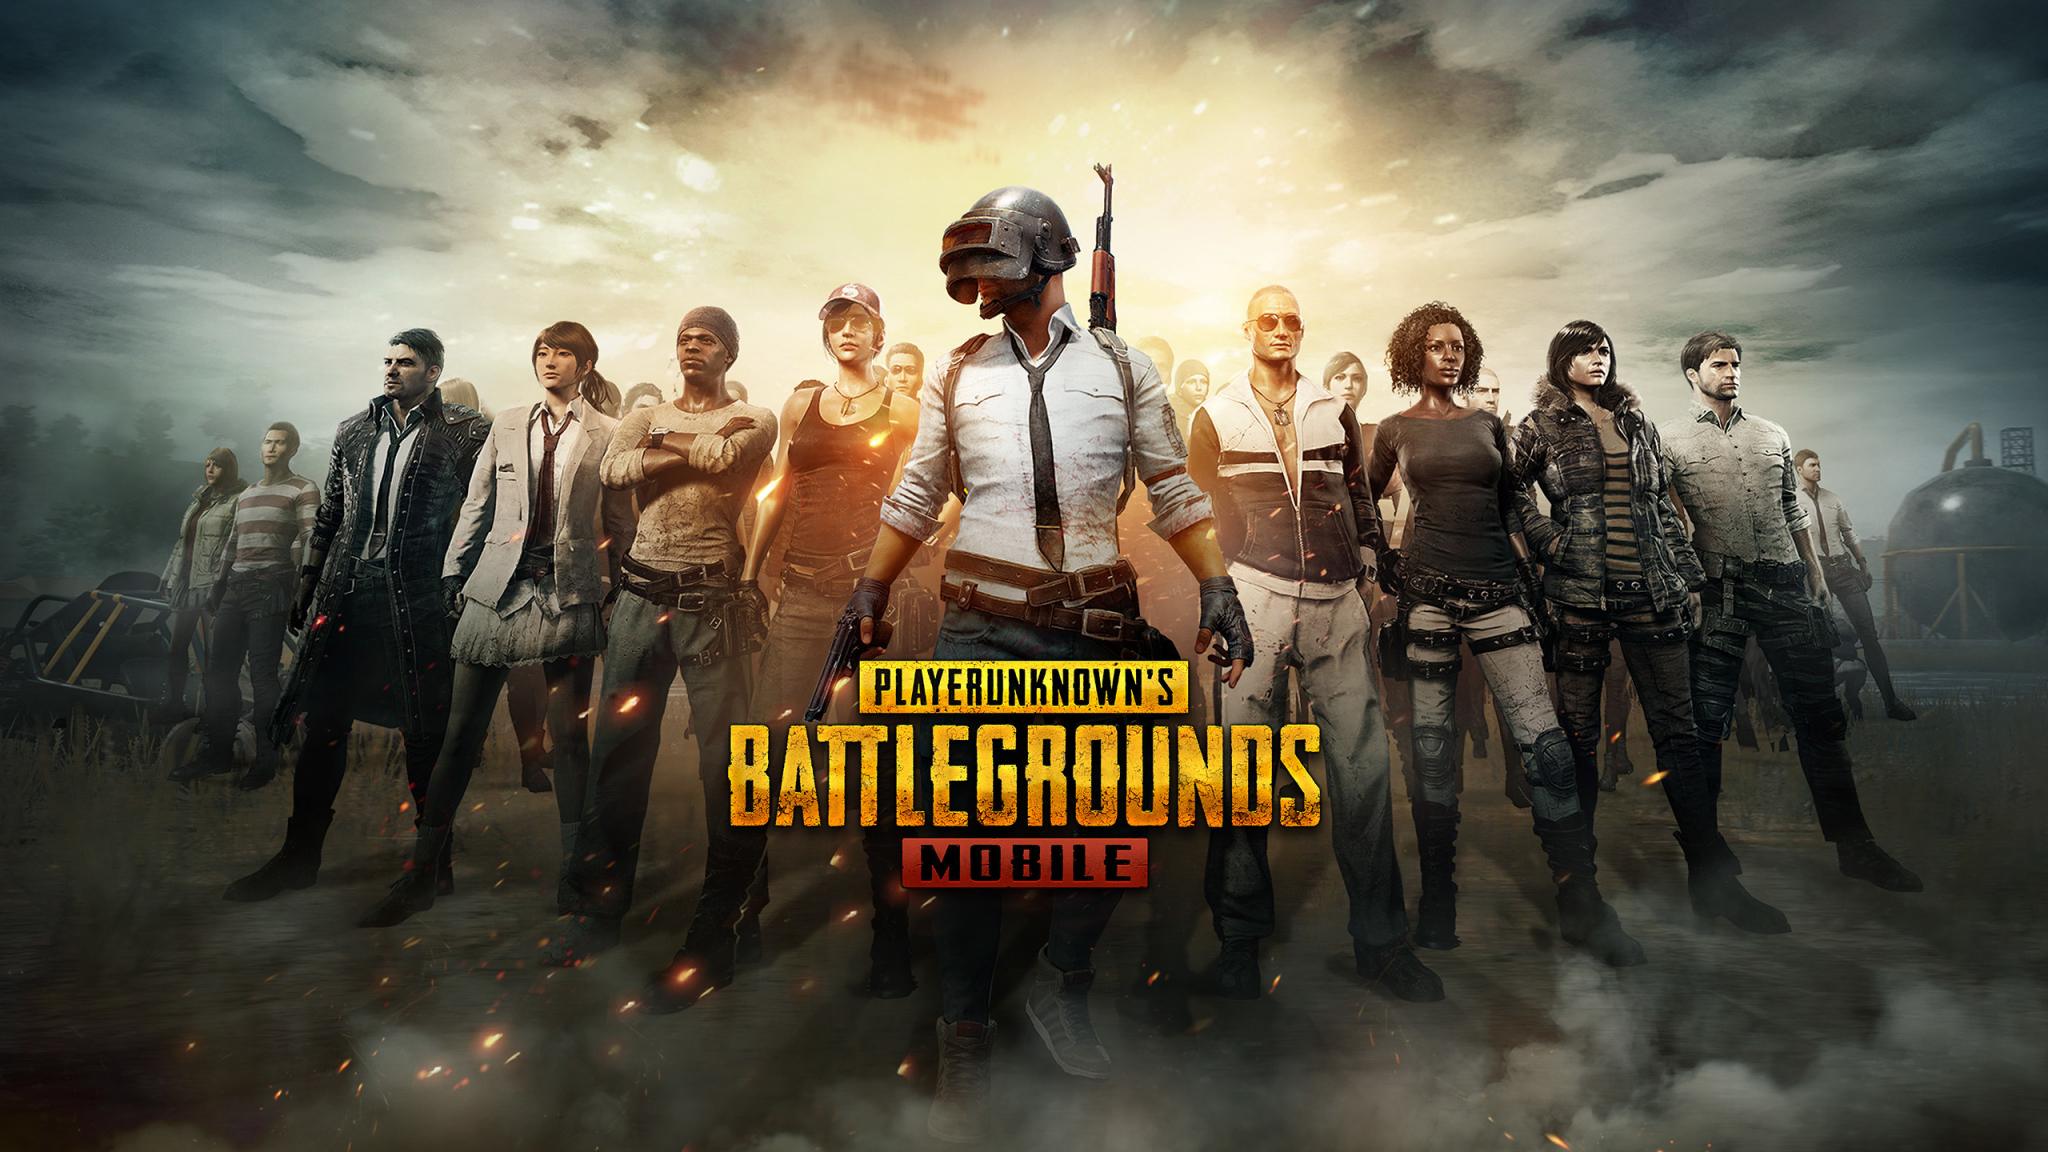 Download 2048x1152 Wallpaper Pubg Mobile Android Game Characters - pubg mobile android game characters 2! 048x1152 wallpaper